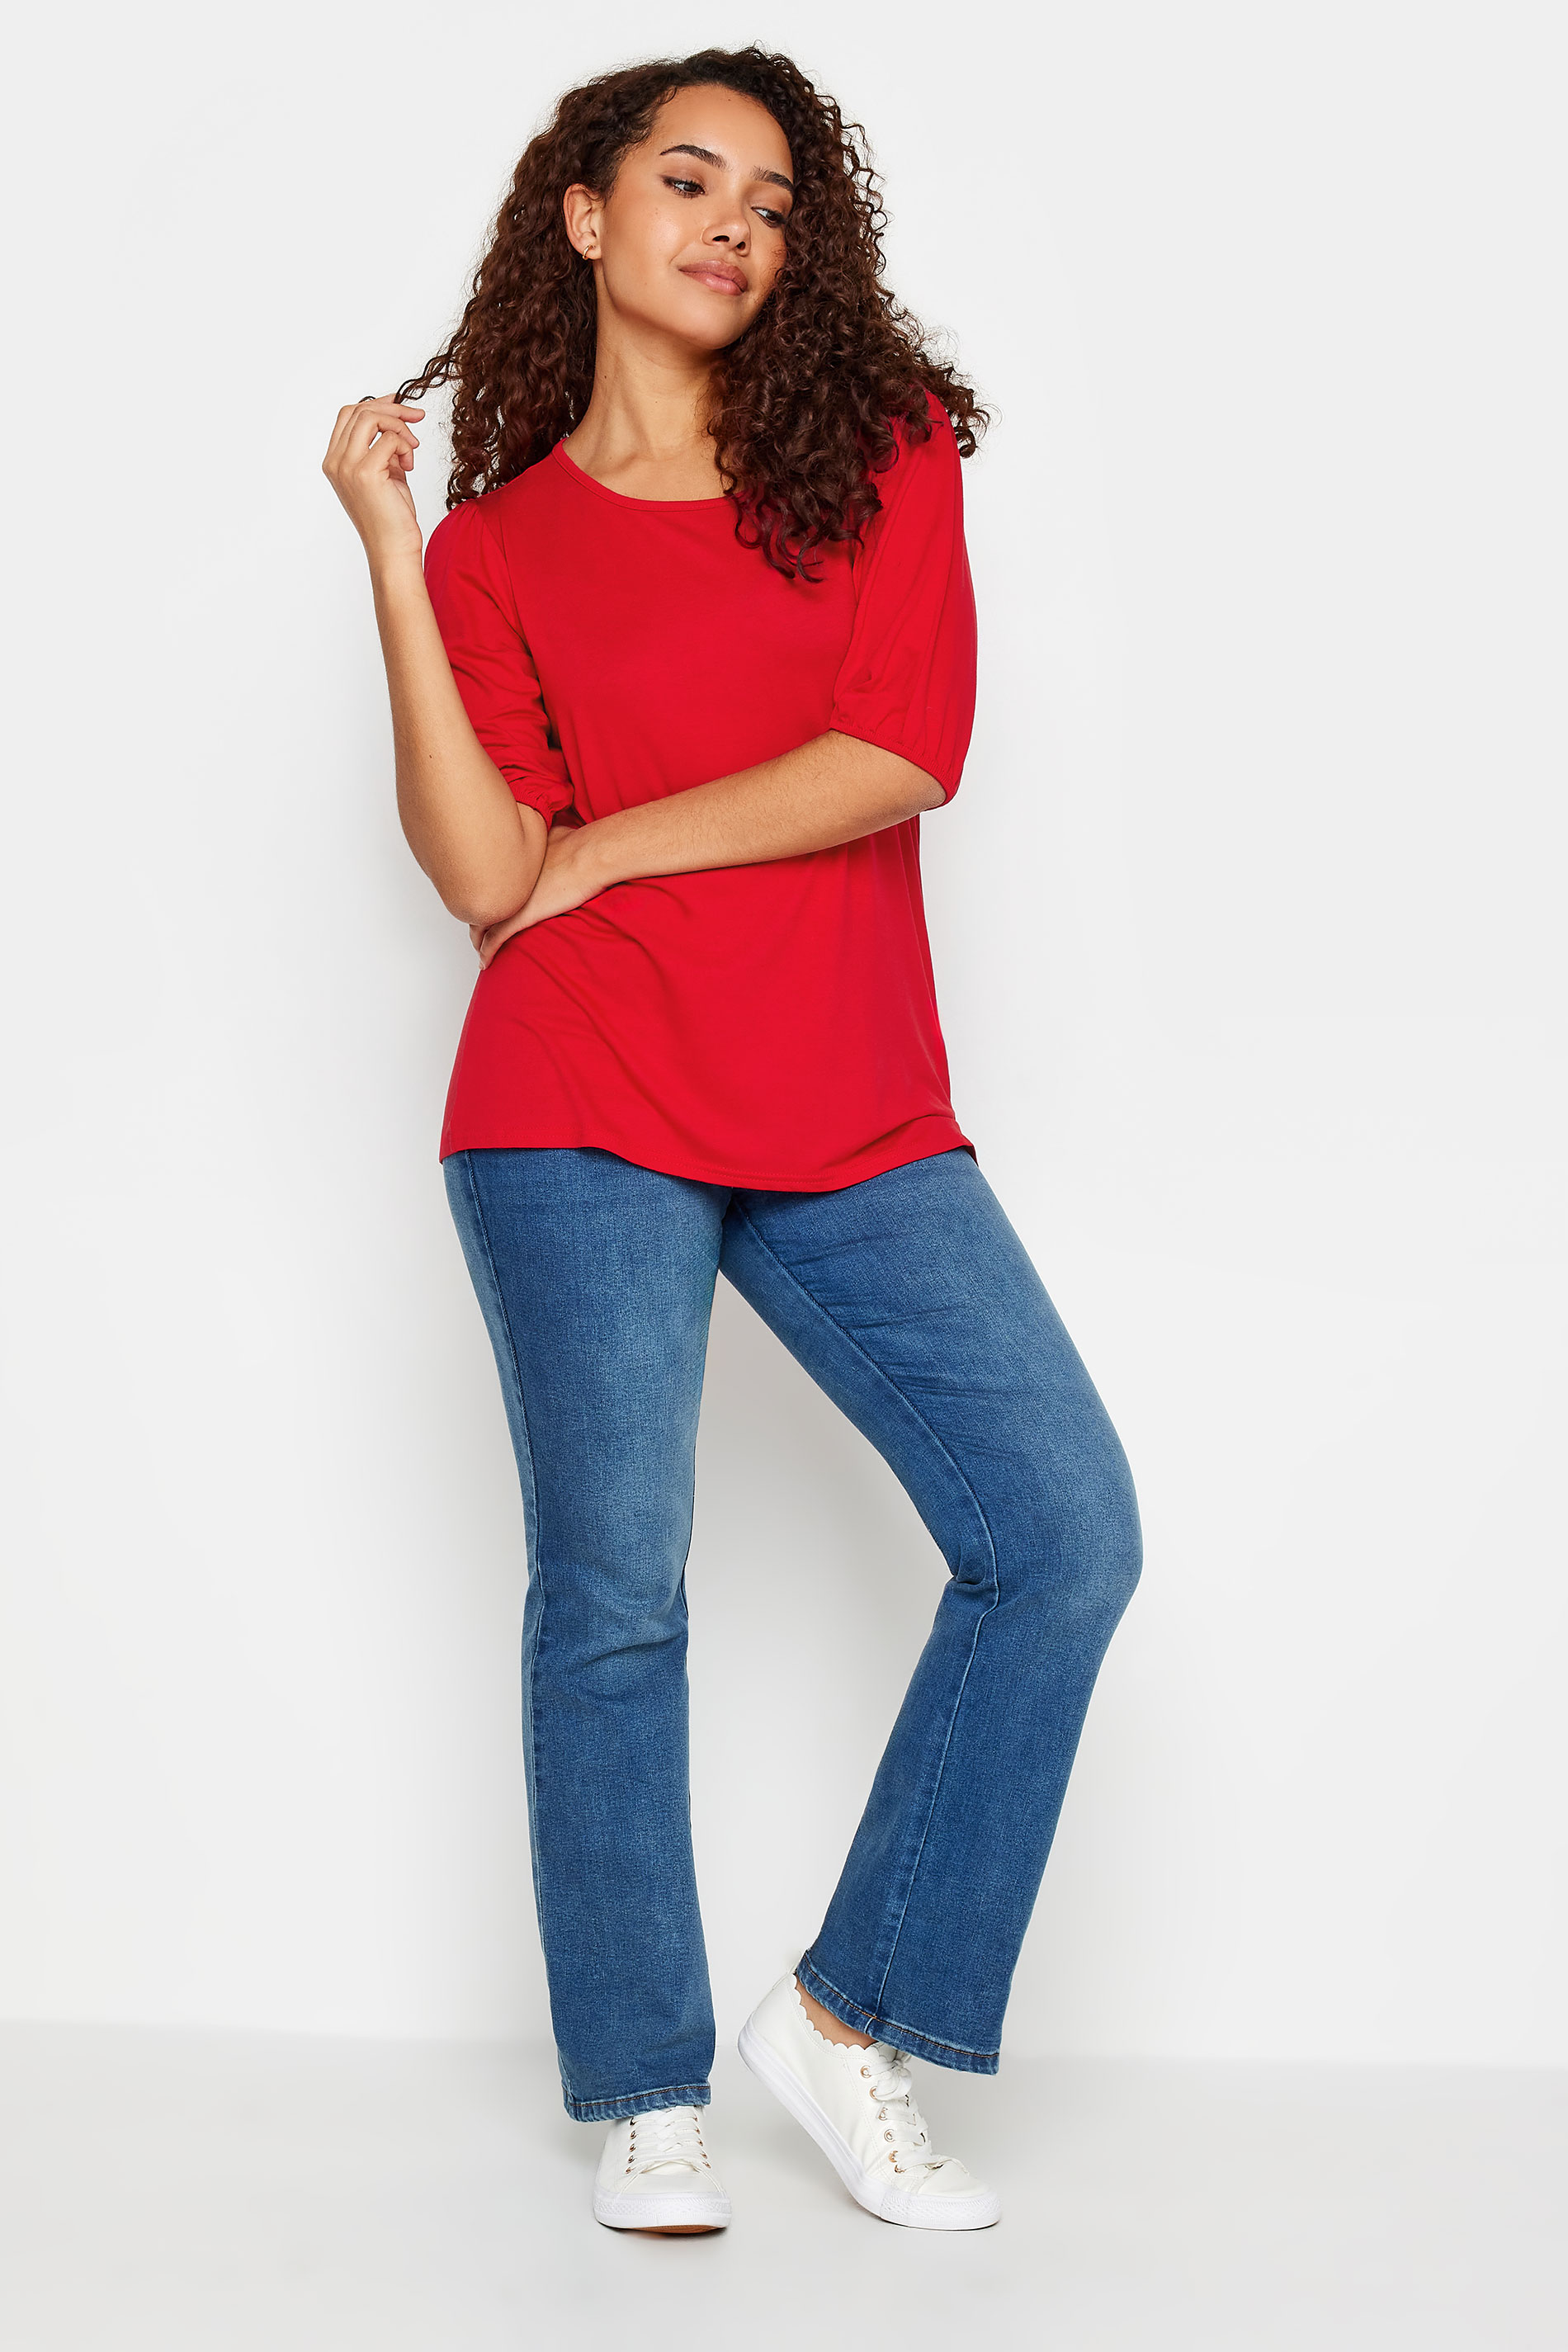 M&Co Red Balloon Sleeve Top | M&Co 2